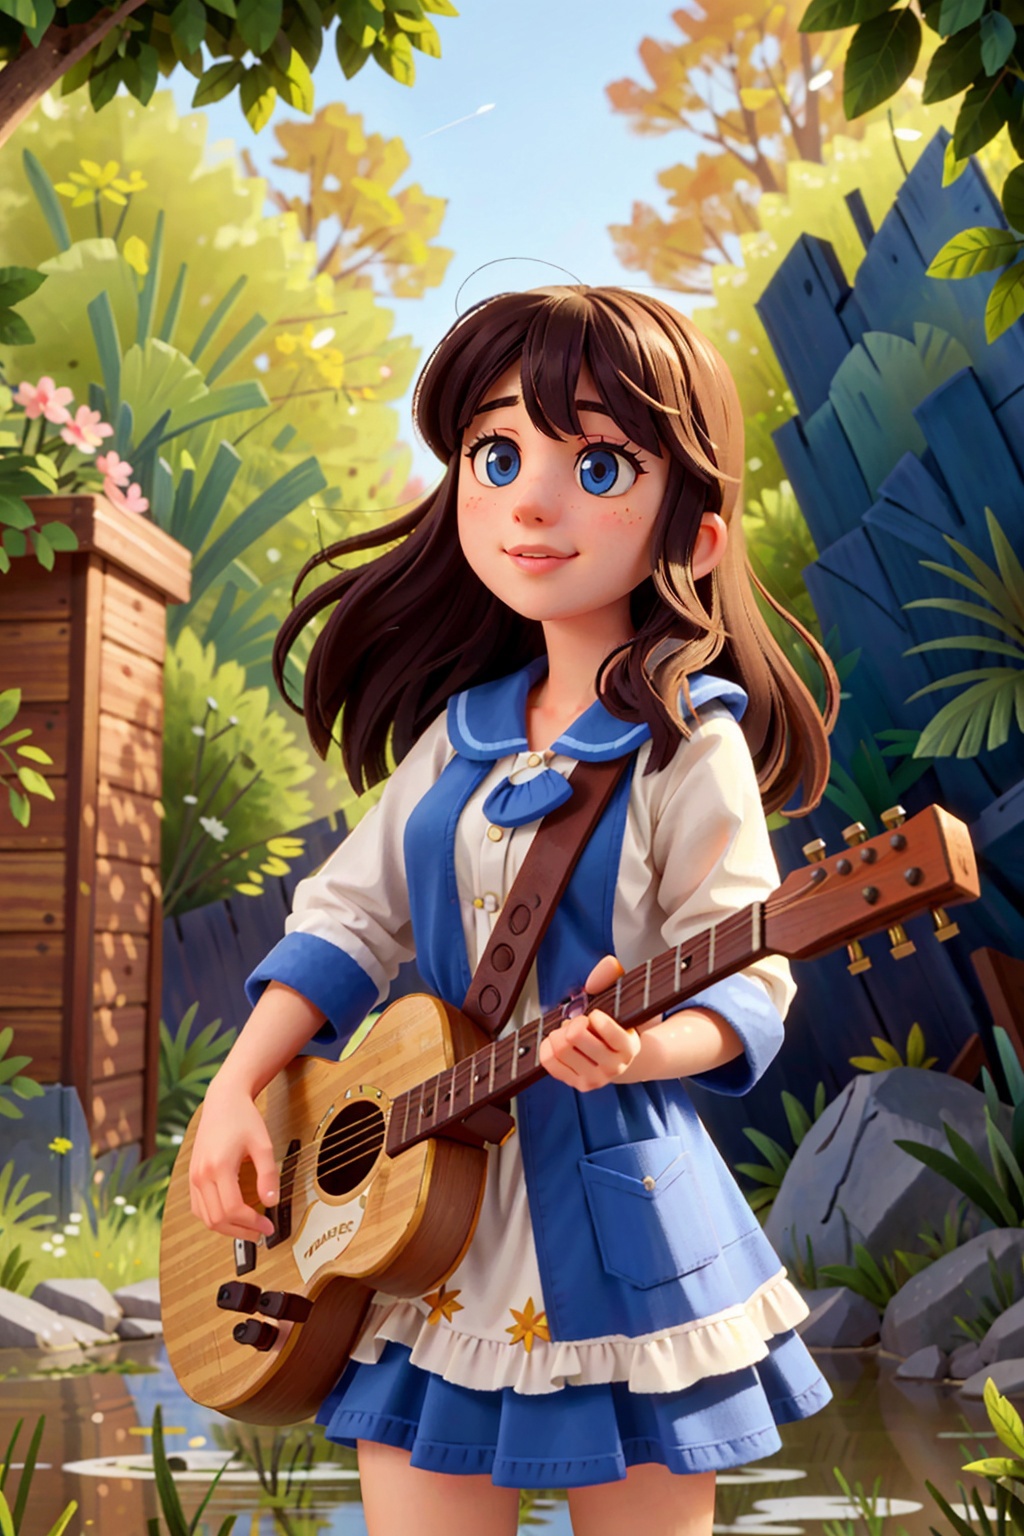 A young girl with blue eyes and a blue shirt plays a guitar in a field.